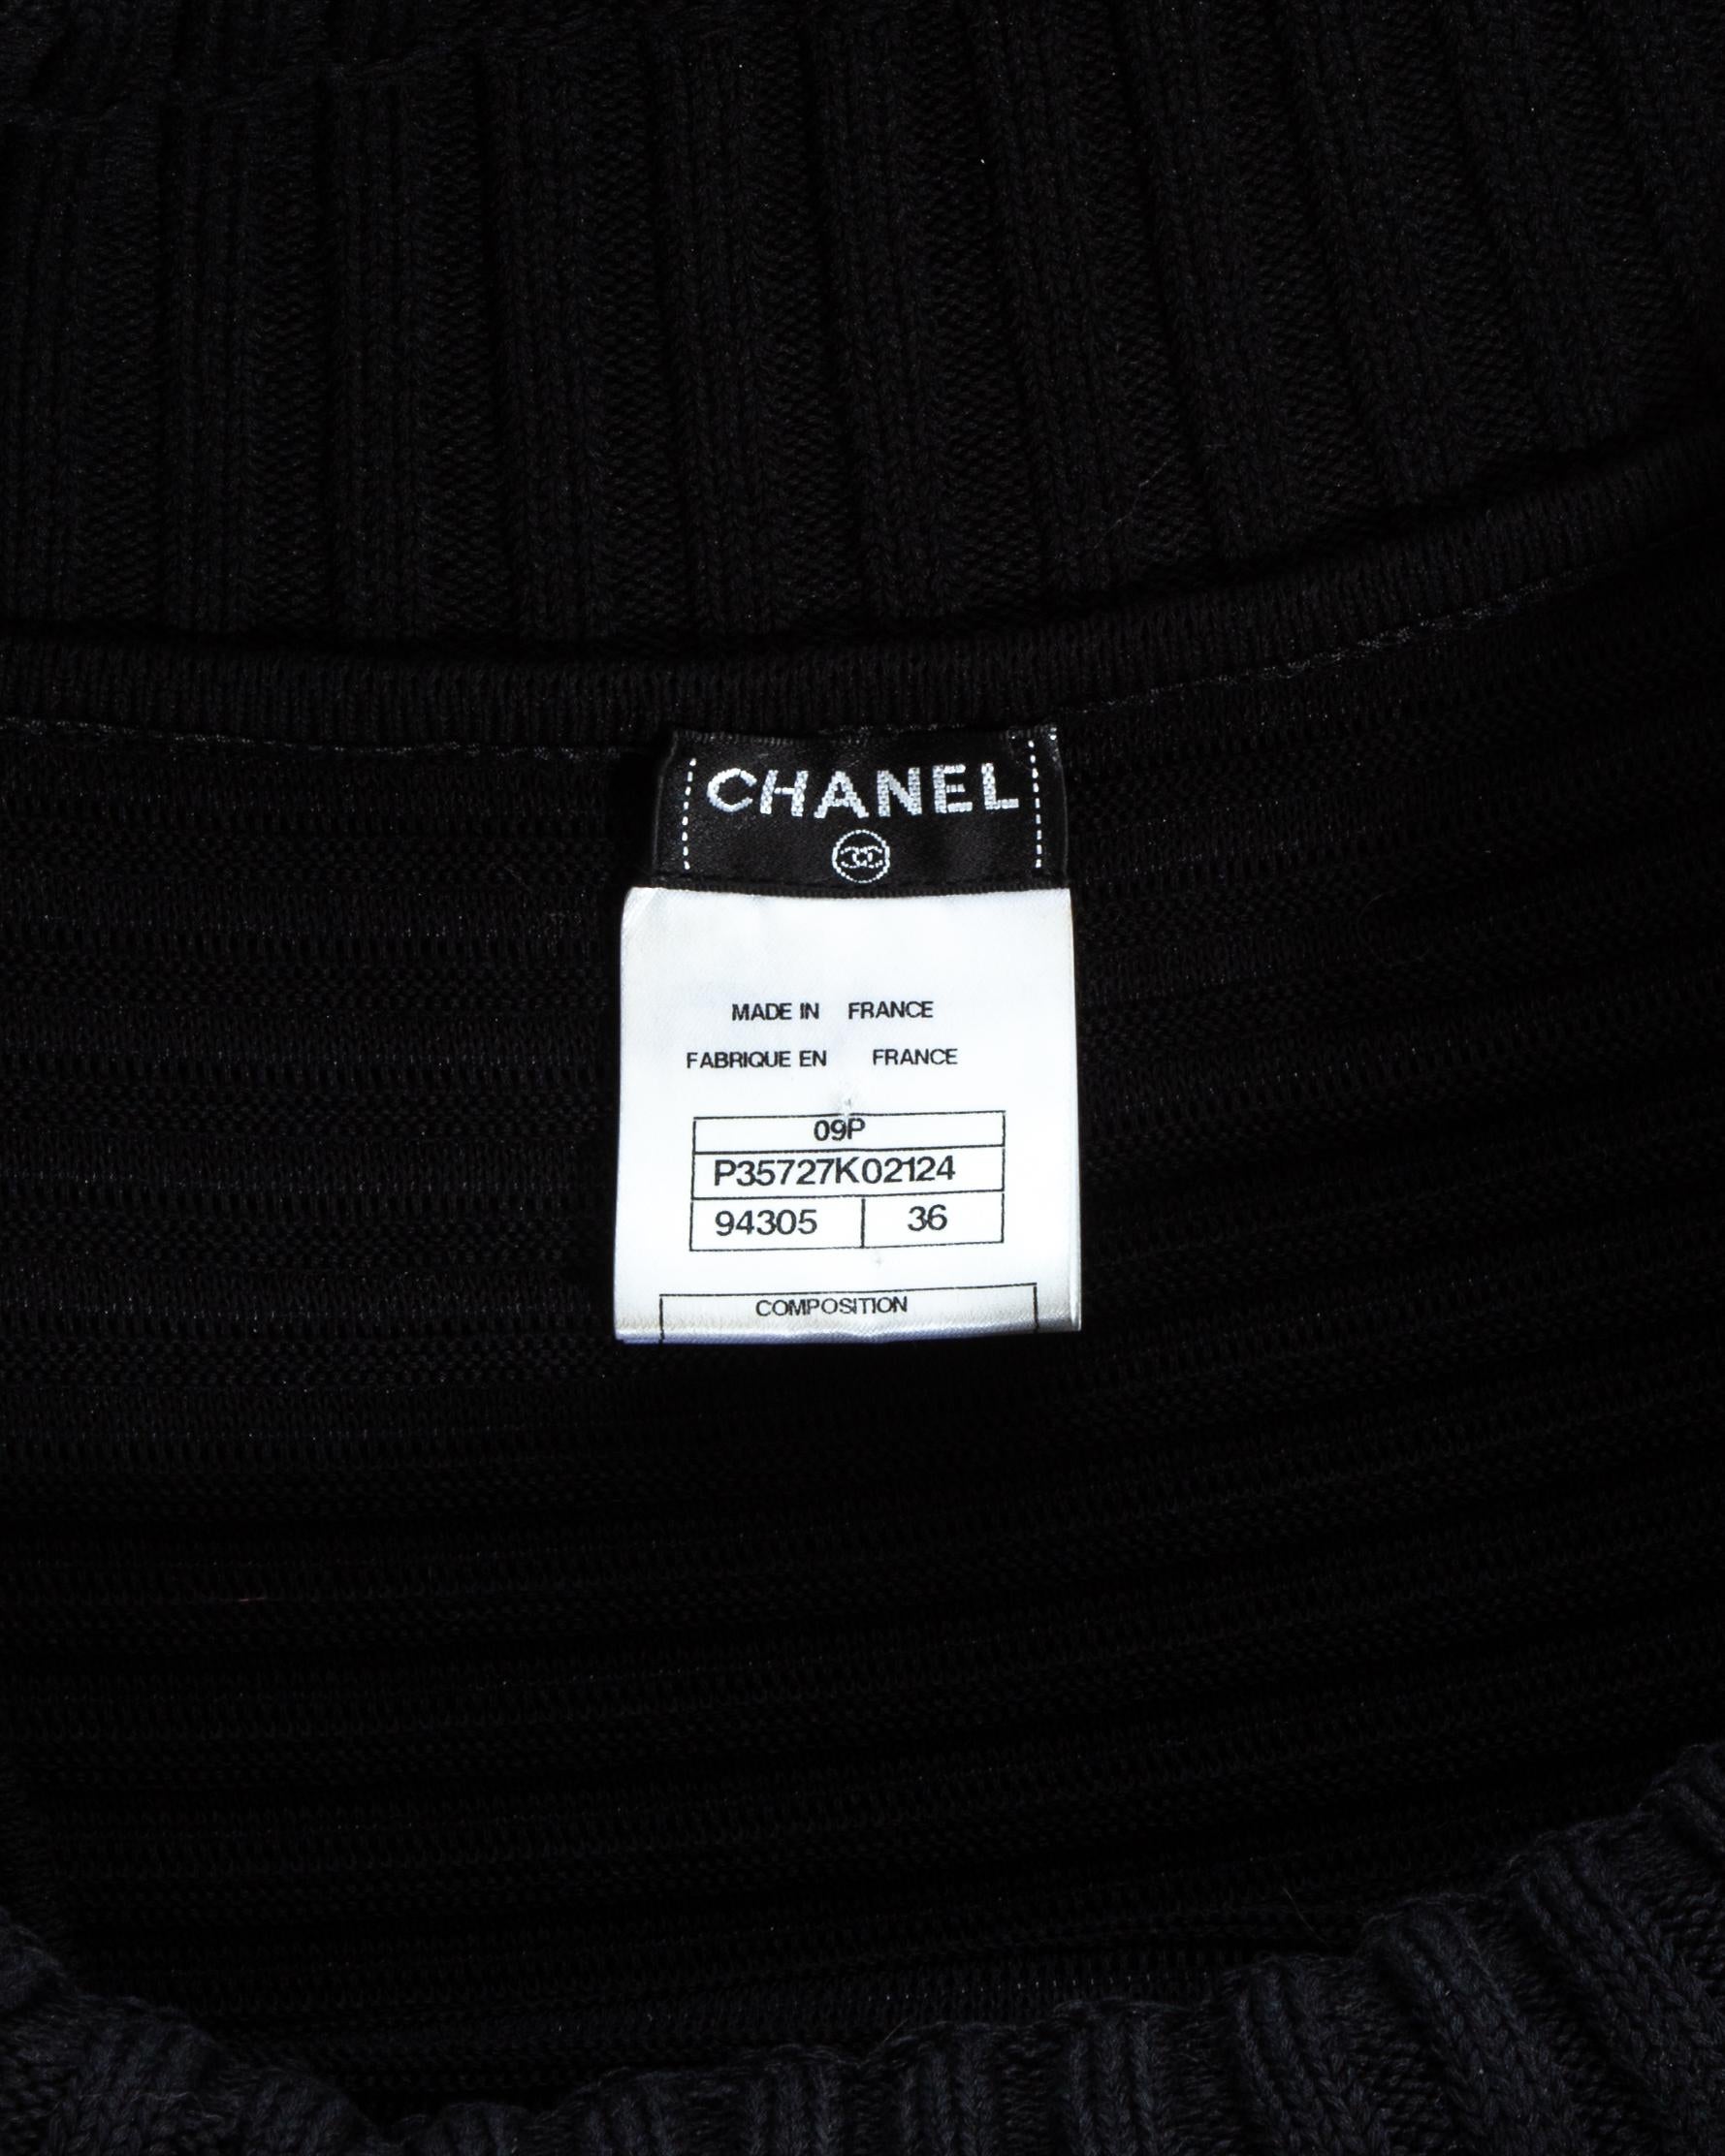 Chanel by Karl Lagerfeld black ribbed knit off shoulder maxi dress, ss 2009 2